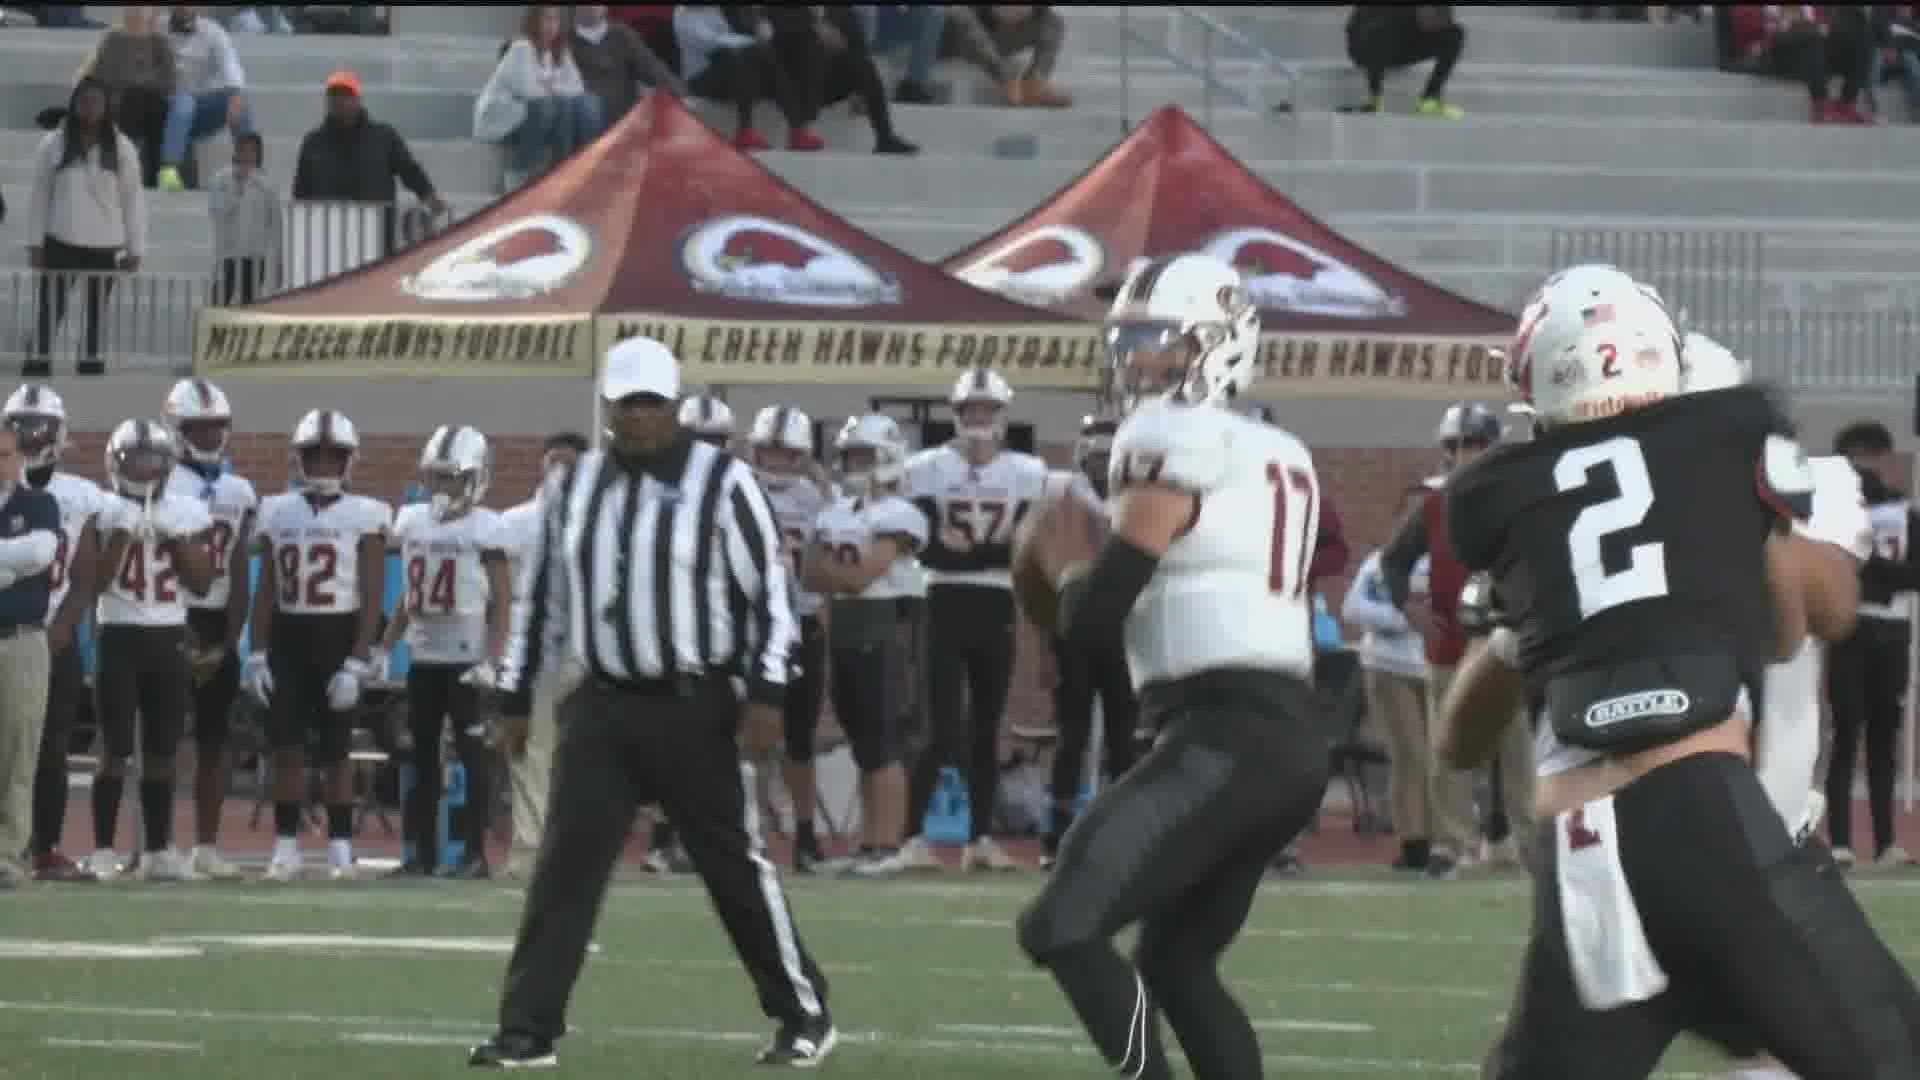 Mill Creek blows out Milton by a final score of 48-14 win to advance to their first ever state title game.